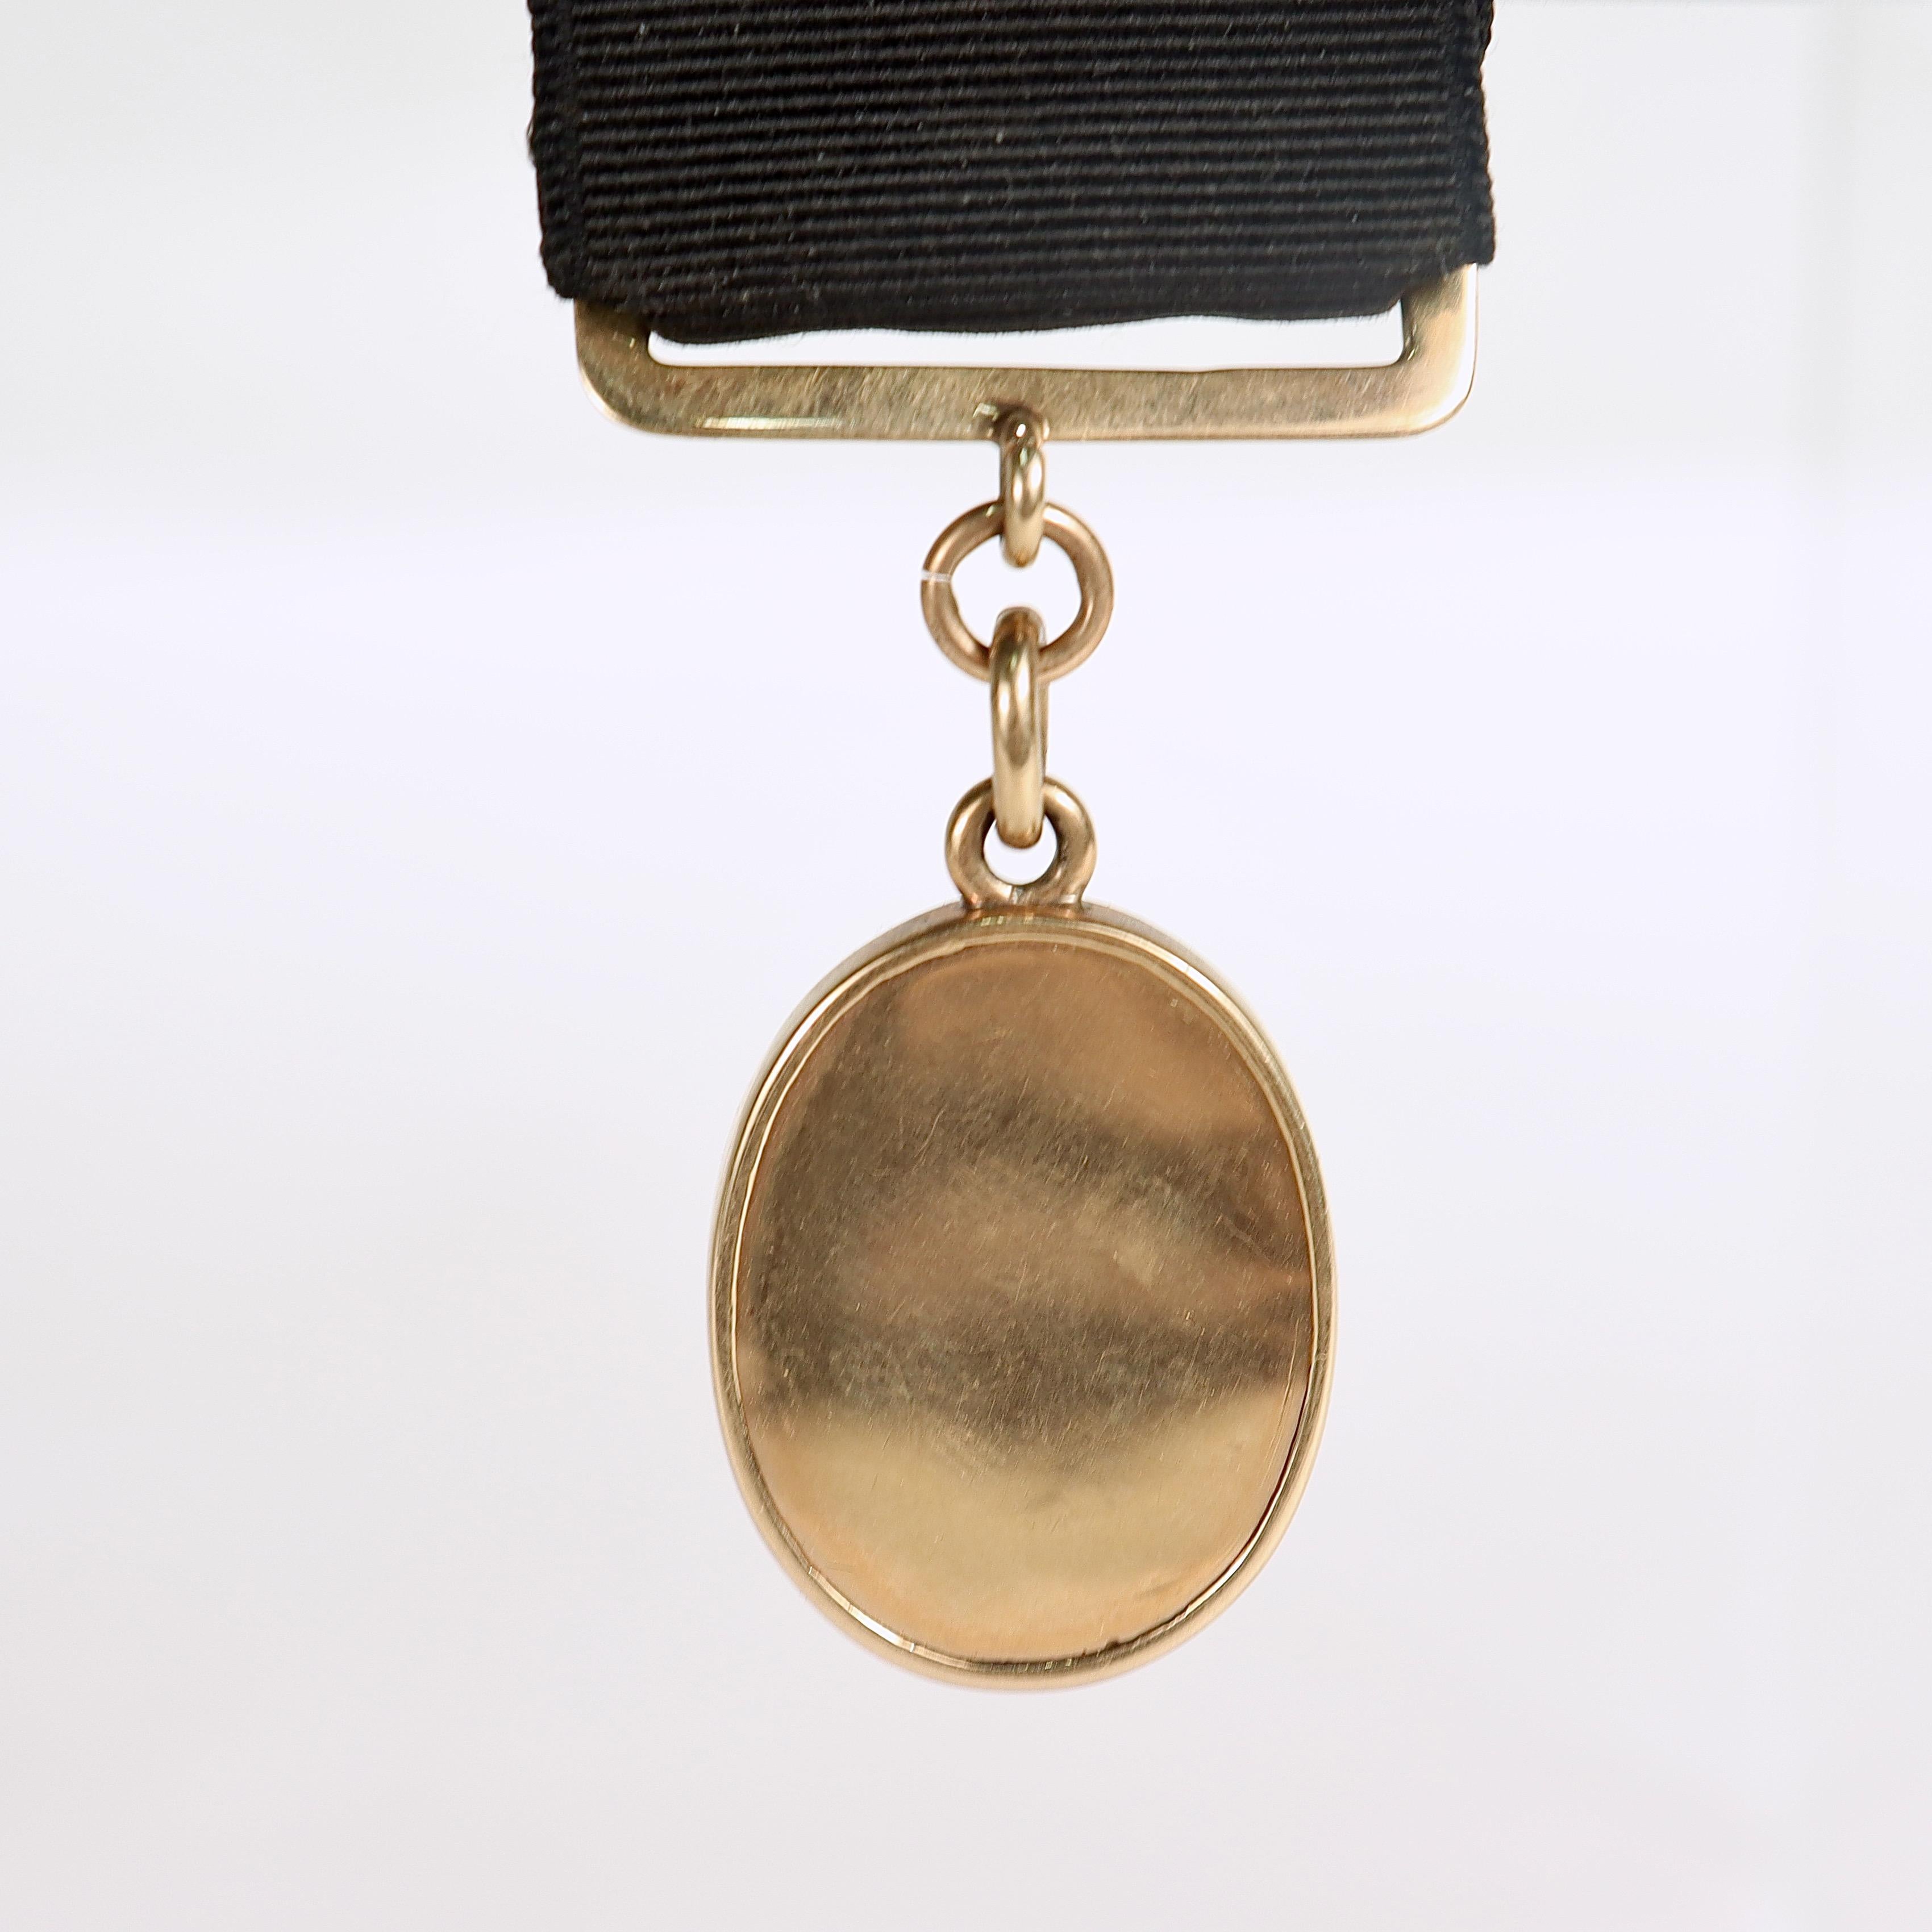 Cabochon Presentation Indian Penny / Gold Quartz Watch Fob from President Teddy Roosevelt For Sale